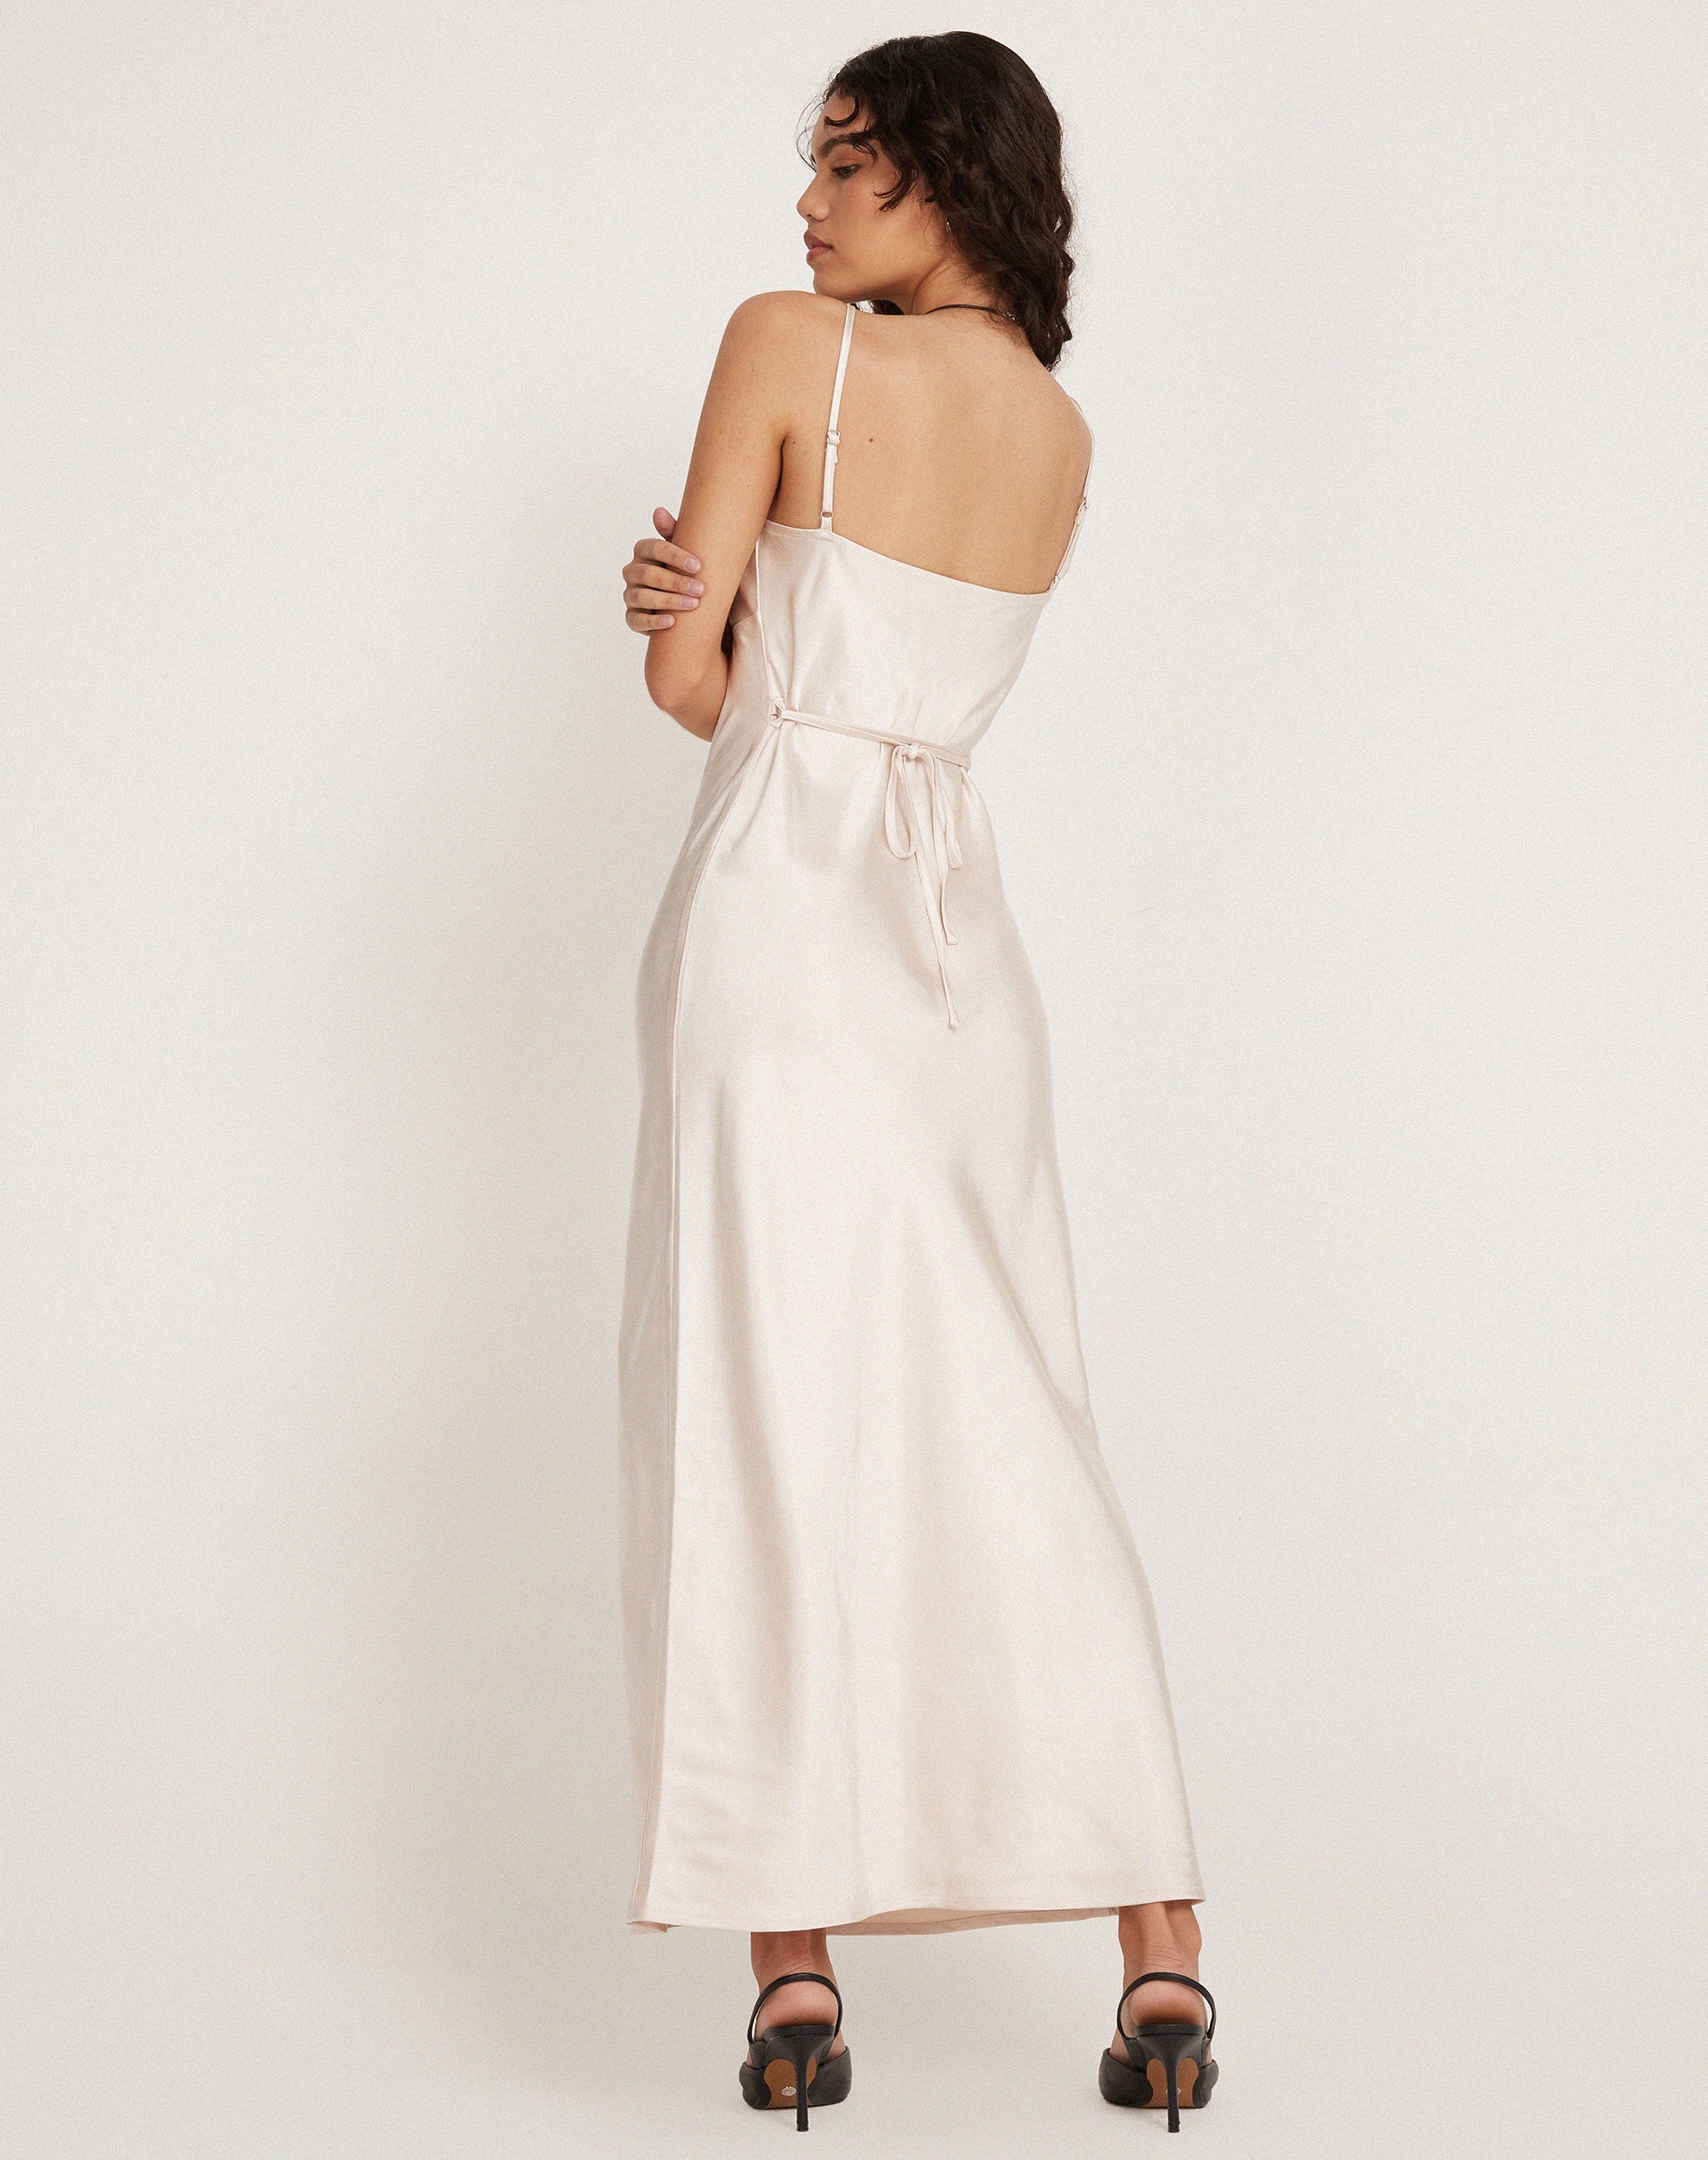 Vilarica Mini Slip Dress in Satin Pearled Ivory with Lace